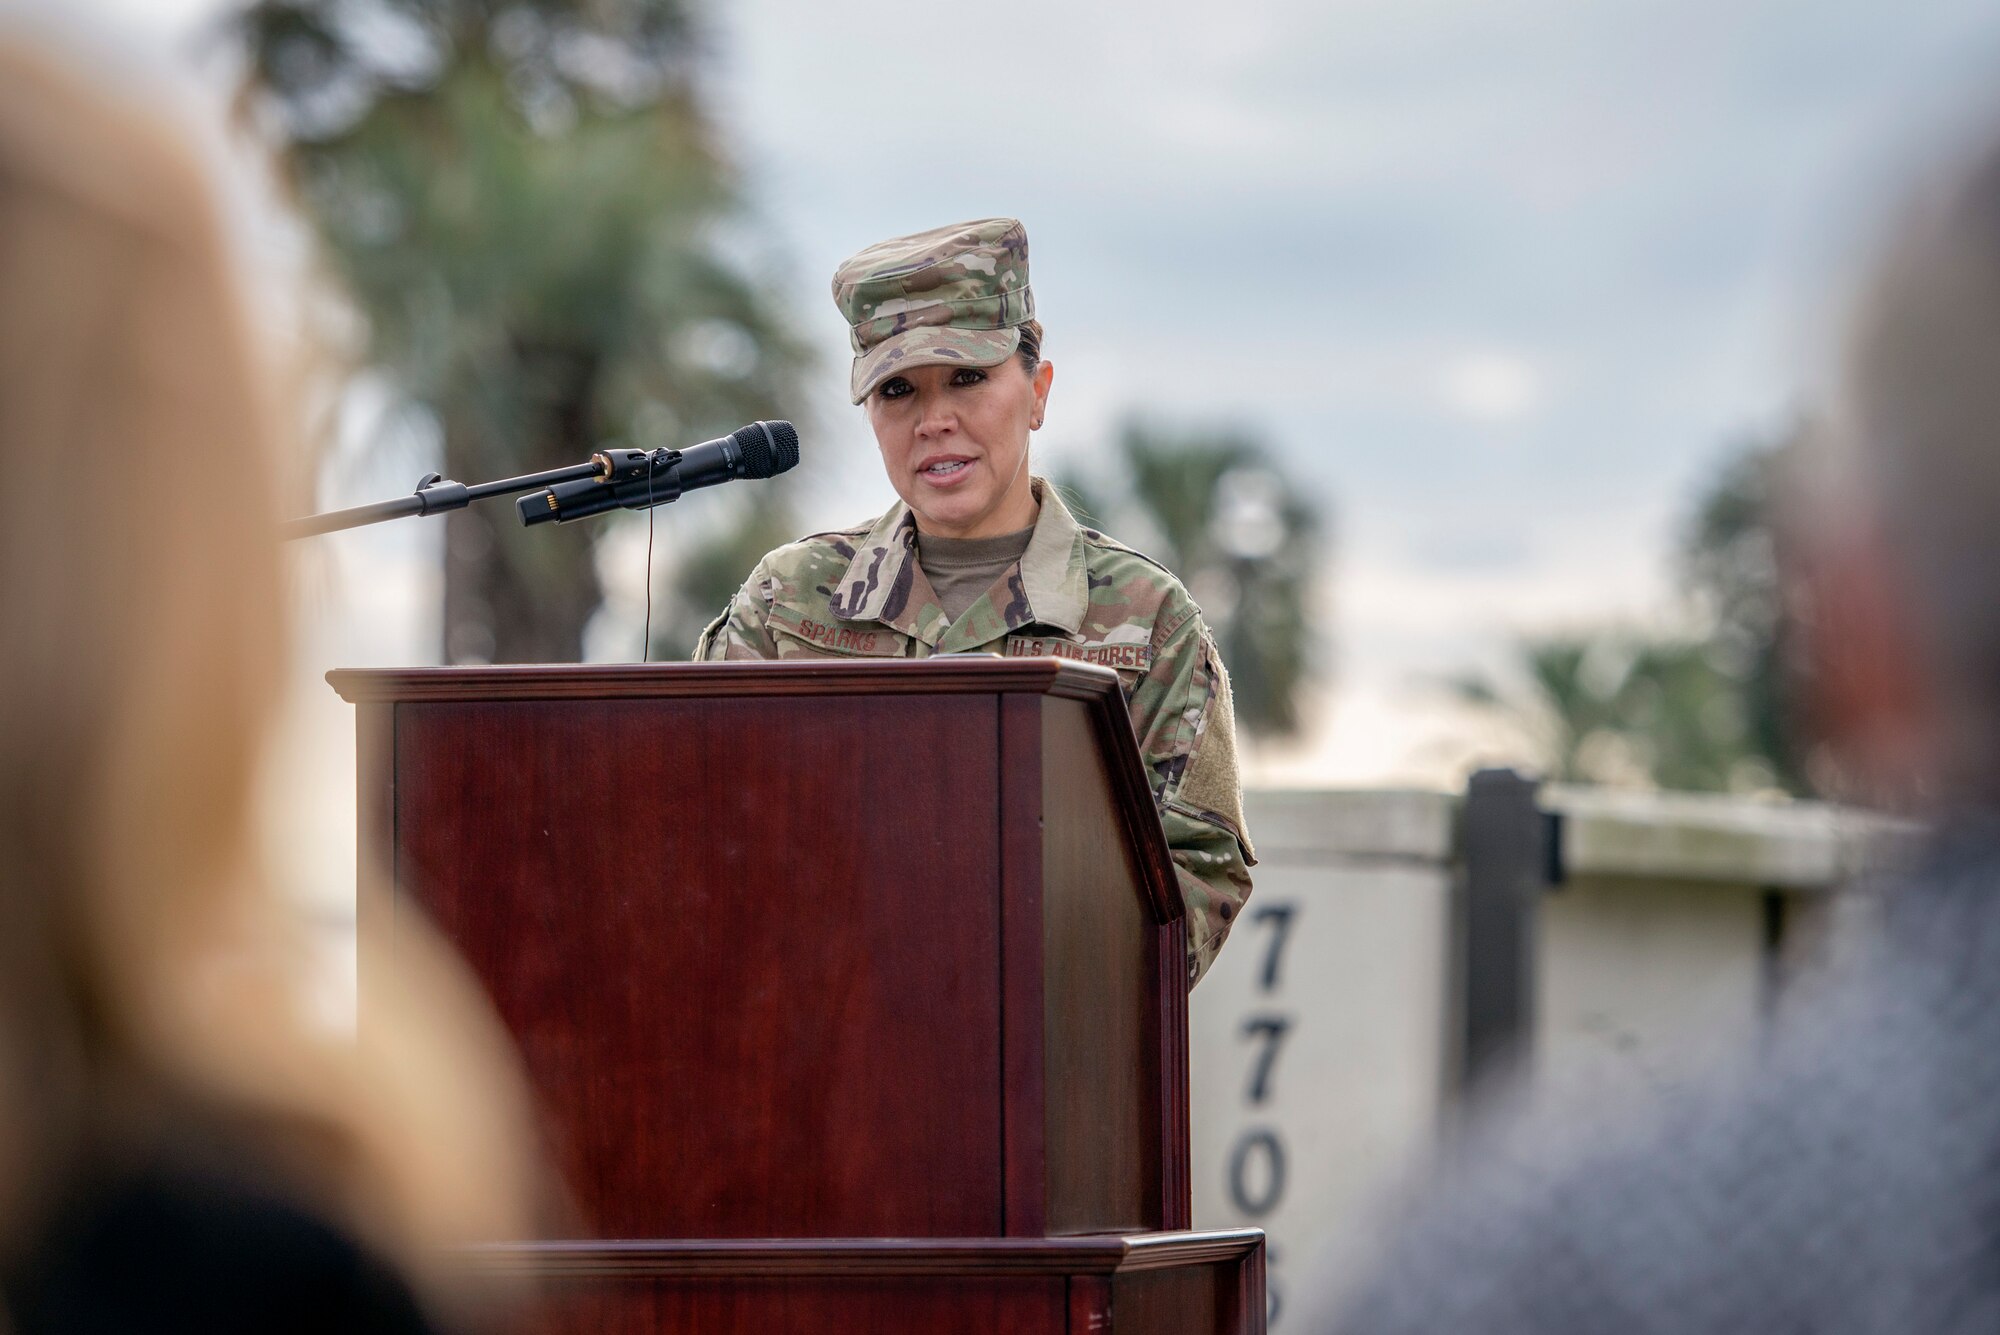 U.S. Air Force Chief Master Sgt. Sarah Sparks, the 6th Air Mobility Wing Command Chief, speaks at Master Sgt. John Chapman’s memorial service at MacDill Air Force Base, Fla., Jan. 30, 2019.